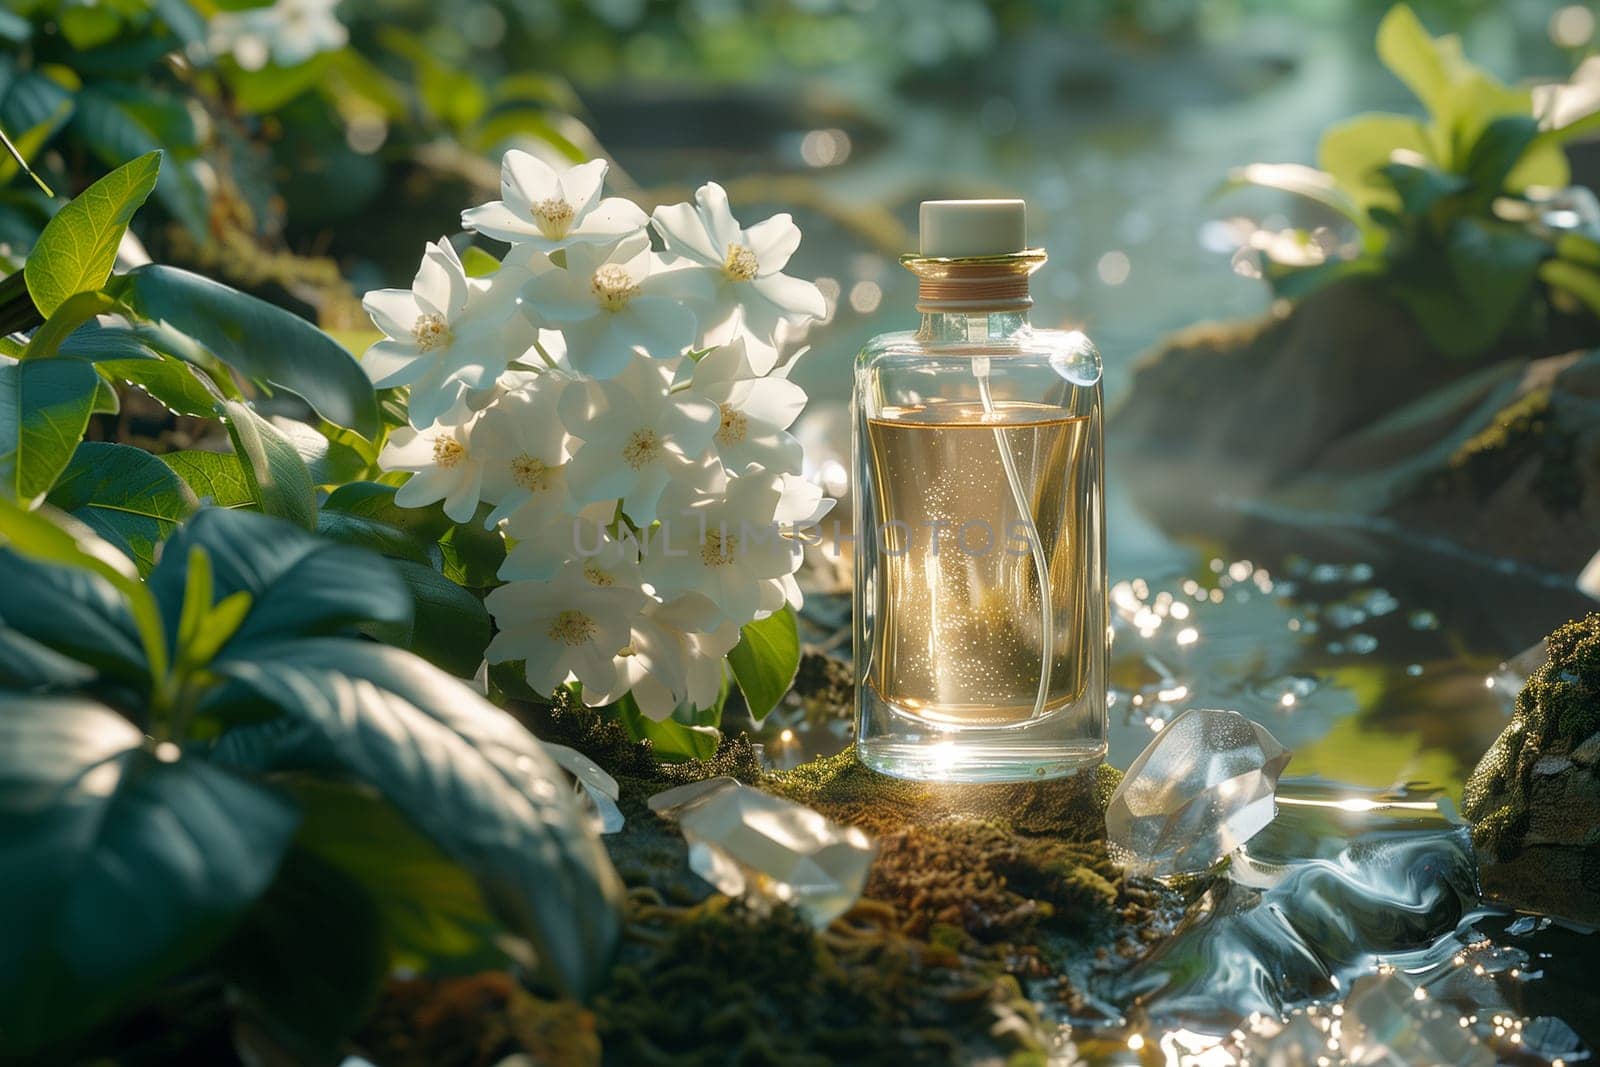 A bottle of perfume placed on a lush green, moss-covered ground next to a stream and white flowers. Combines elegance with nature in a simple but effective composition.